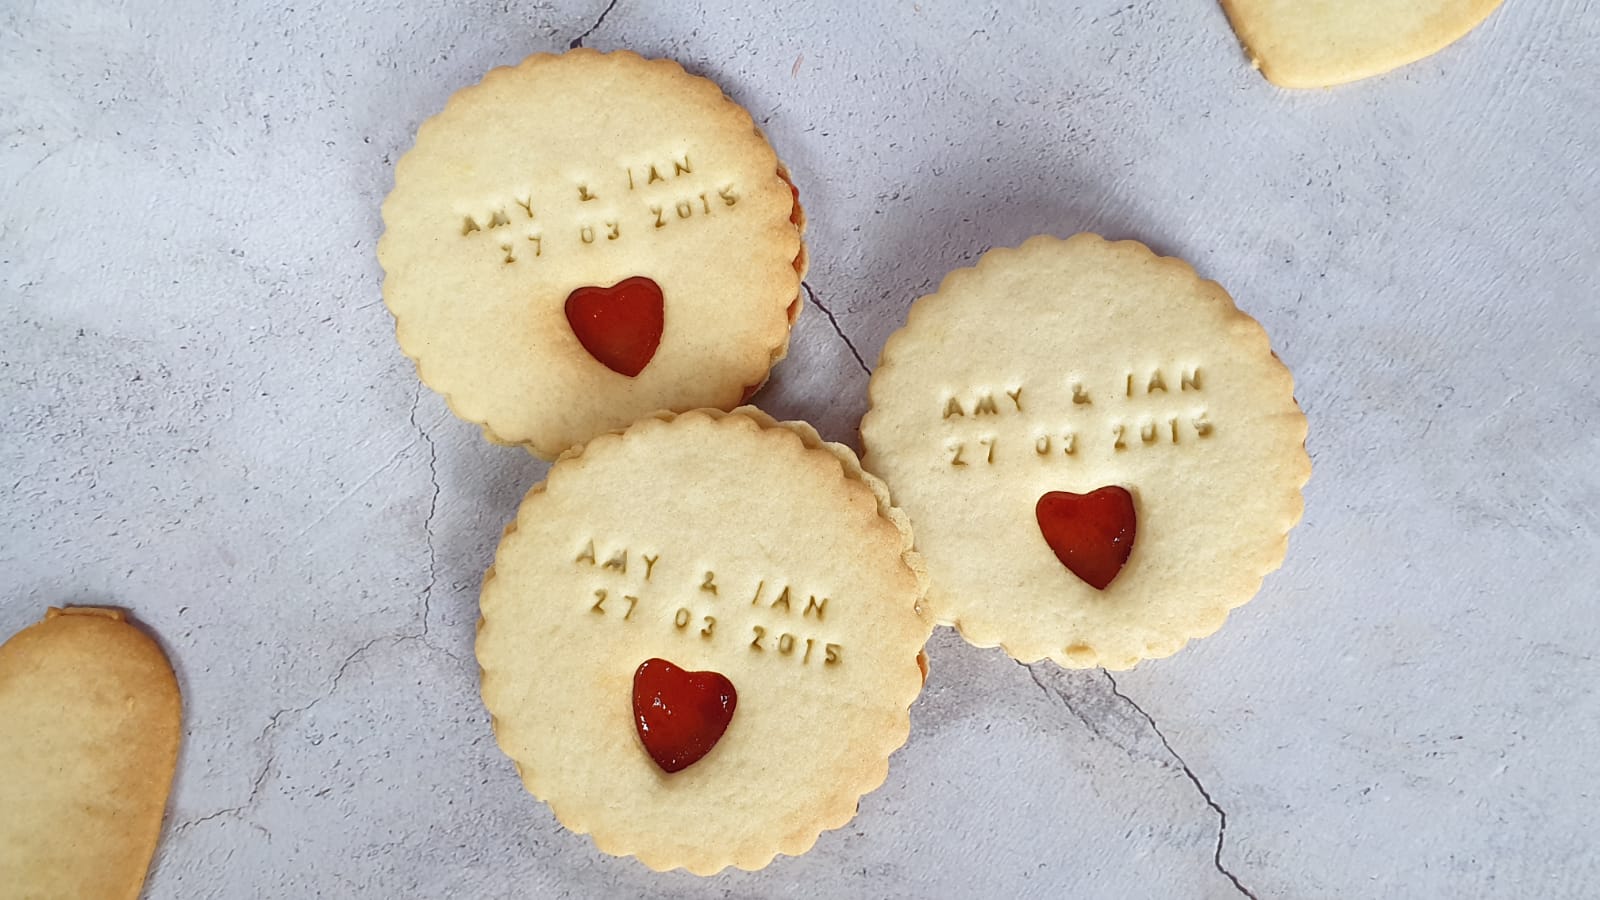 Jam wedding biscuits personalised with names